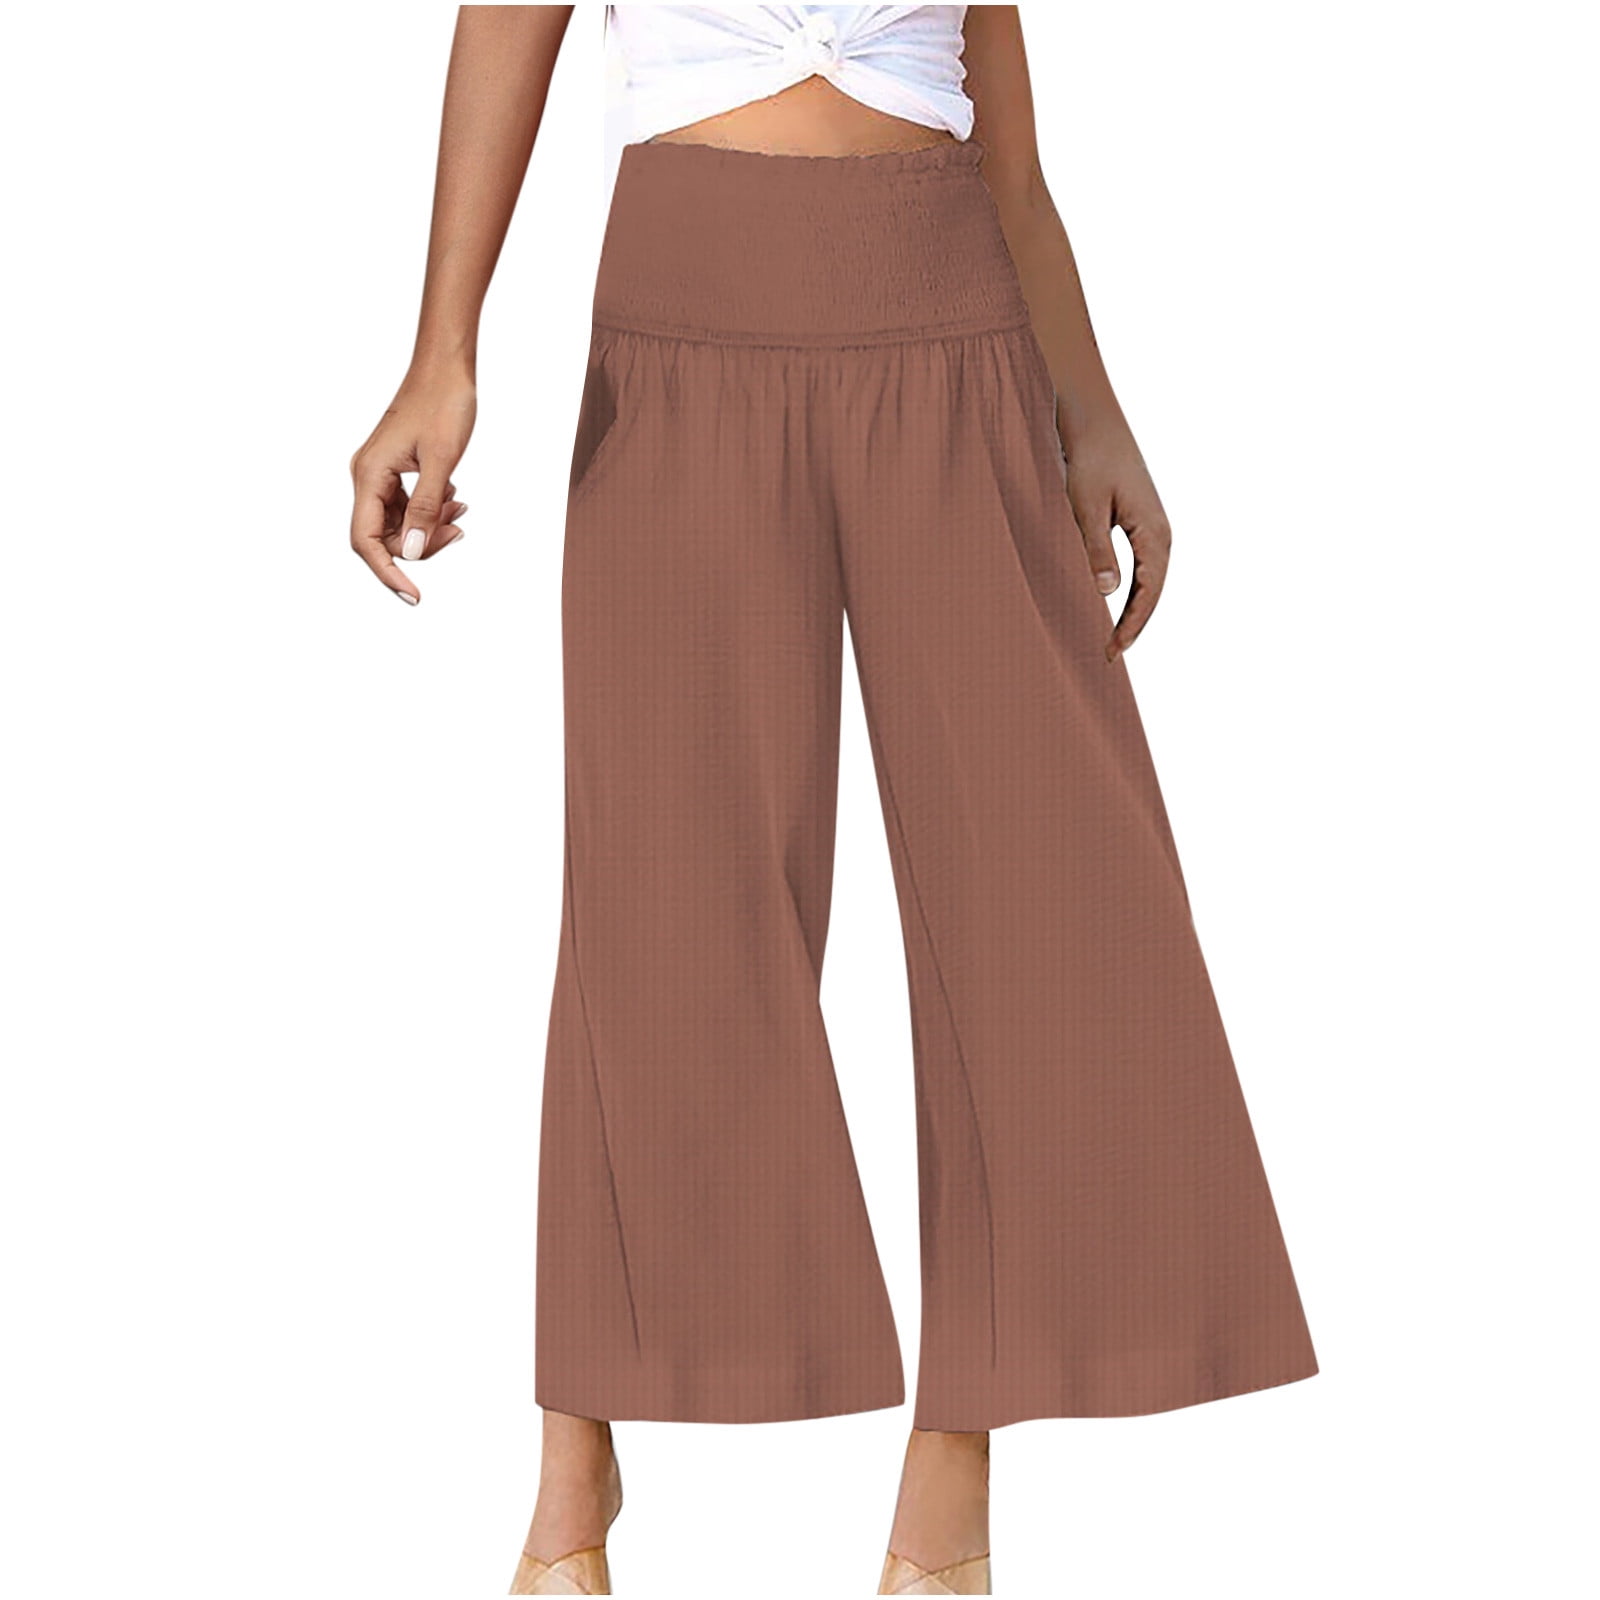 Holiday Savings! Cameland Women's Spring And Autumn Solid Color Versatile  Straight Tube High Waisted Commuting Suit Pants Wide Leg Pants